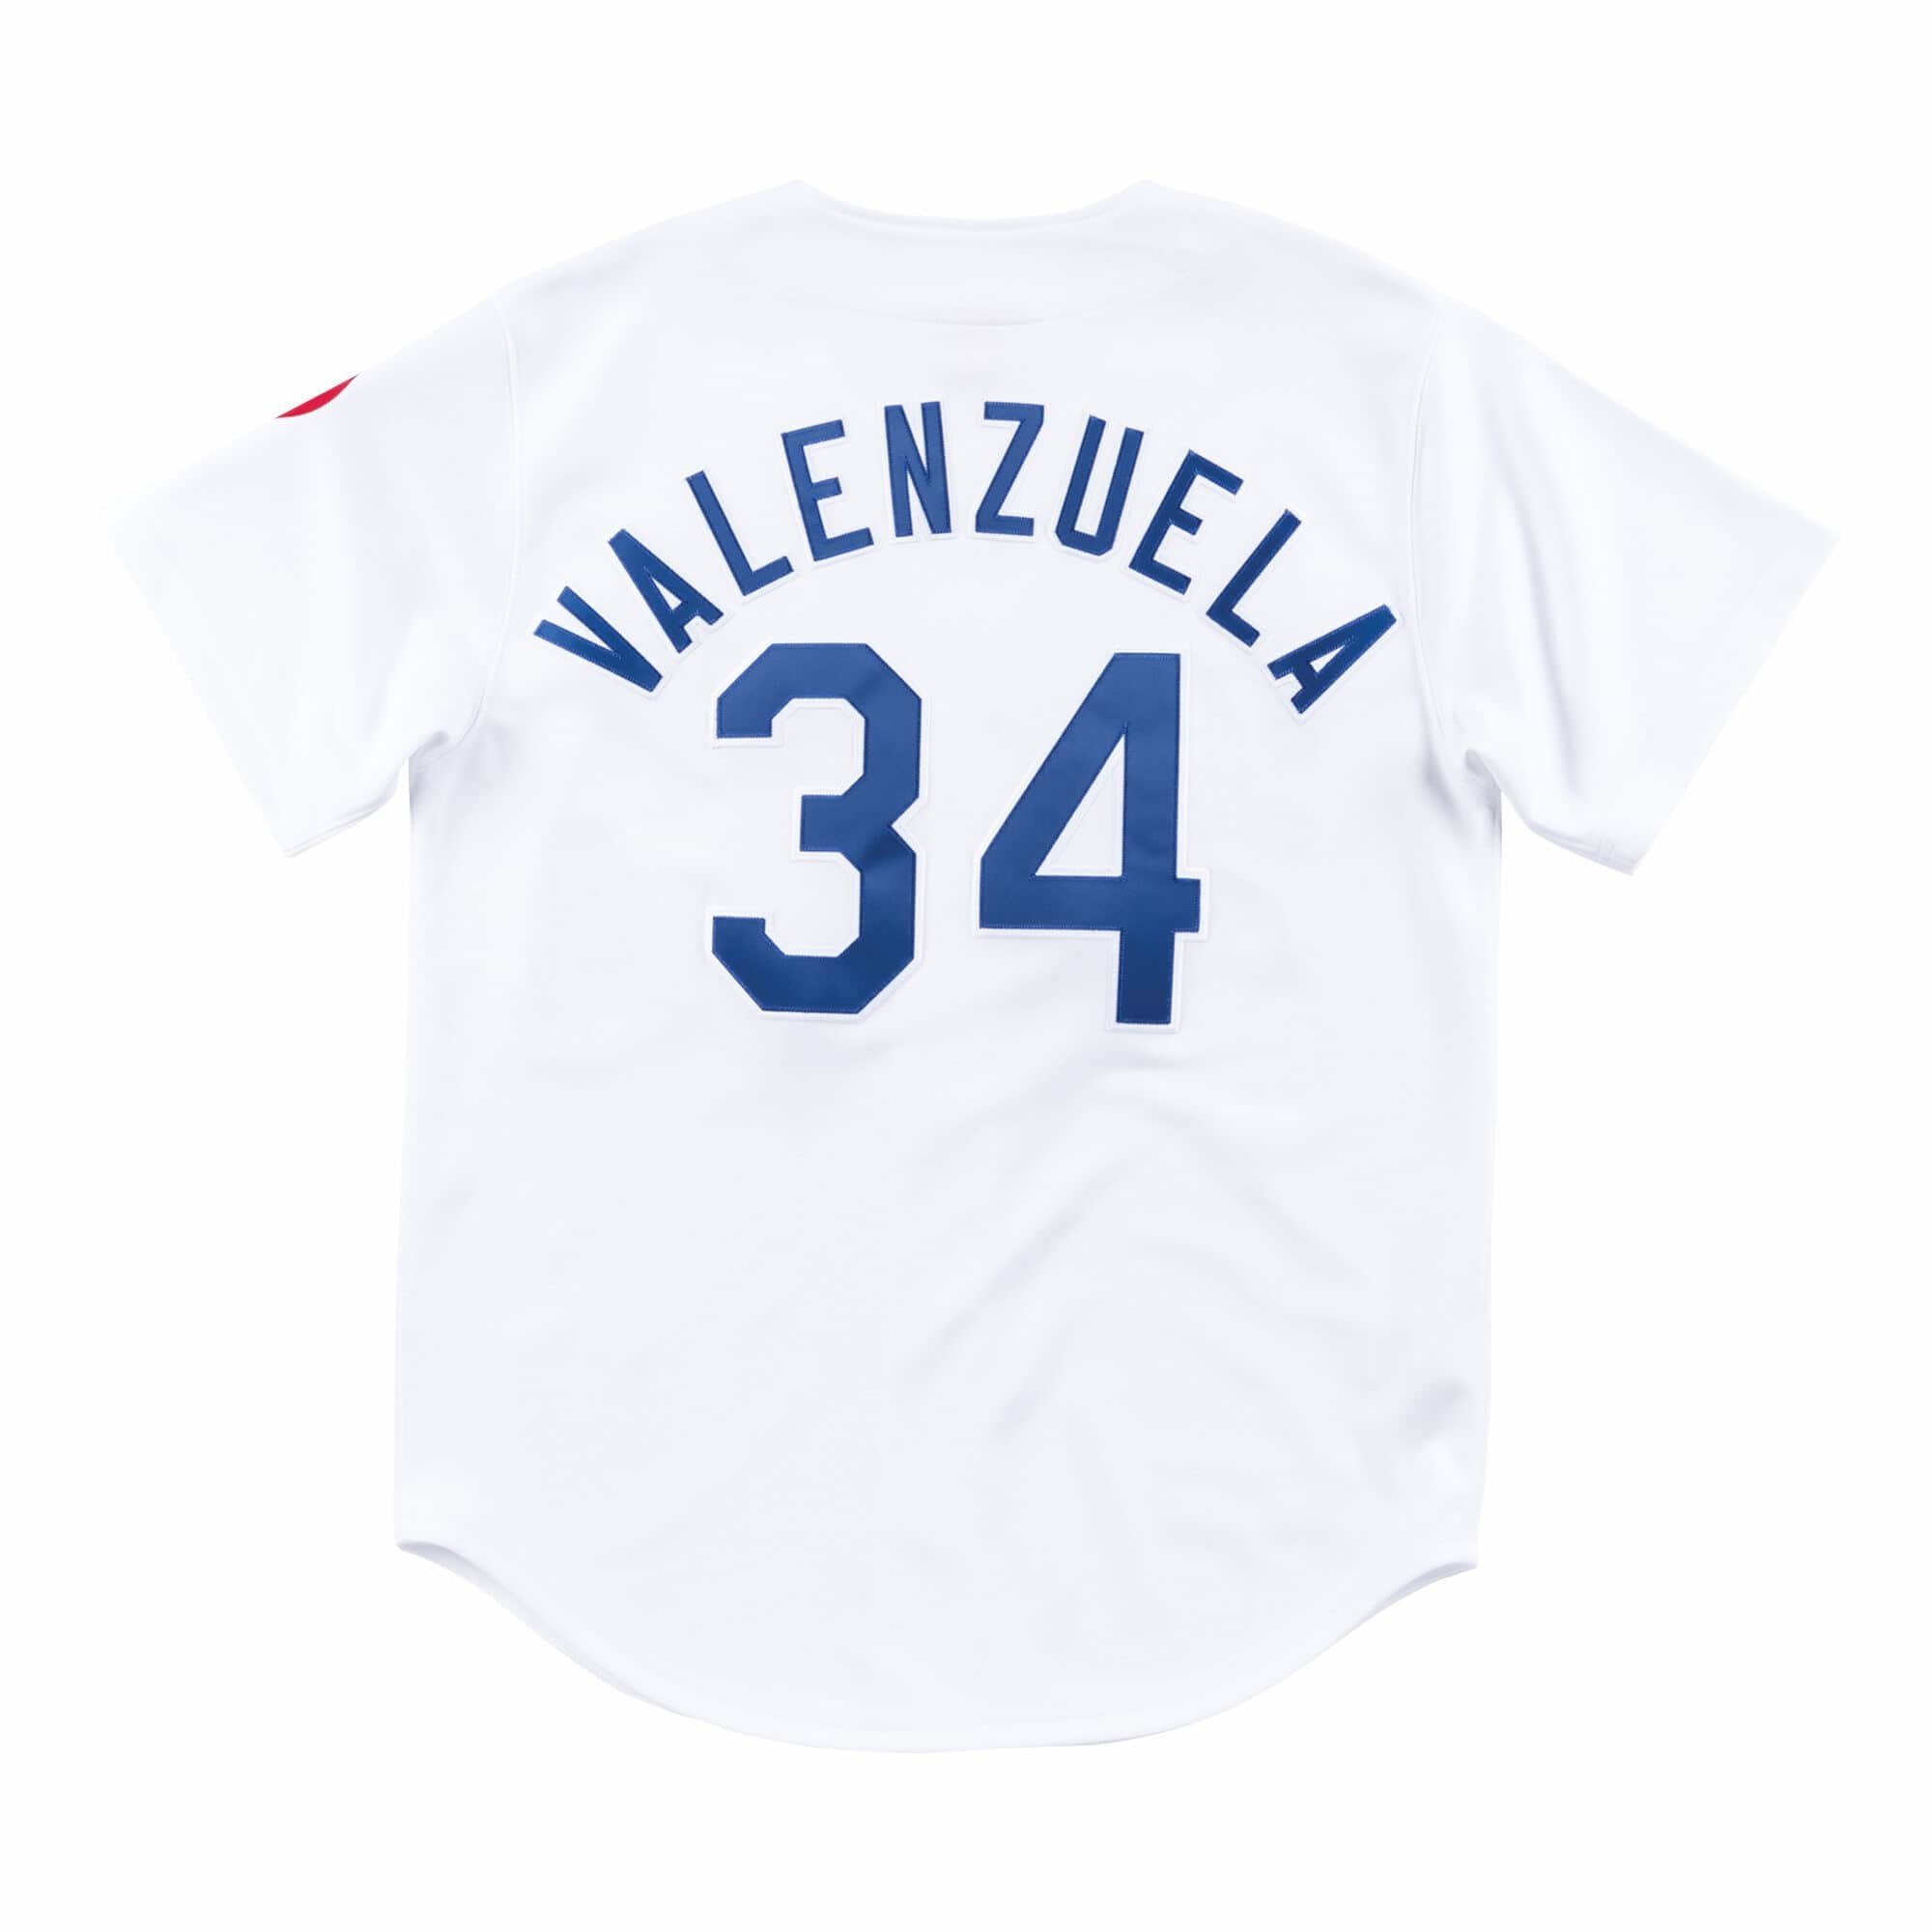 Saw a 1981 Valenzuela jersey with the white piping and had to